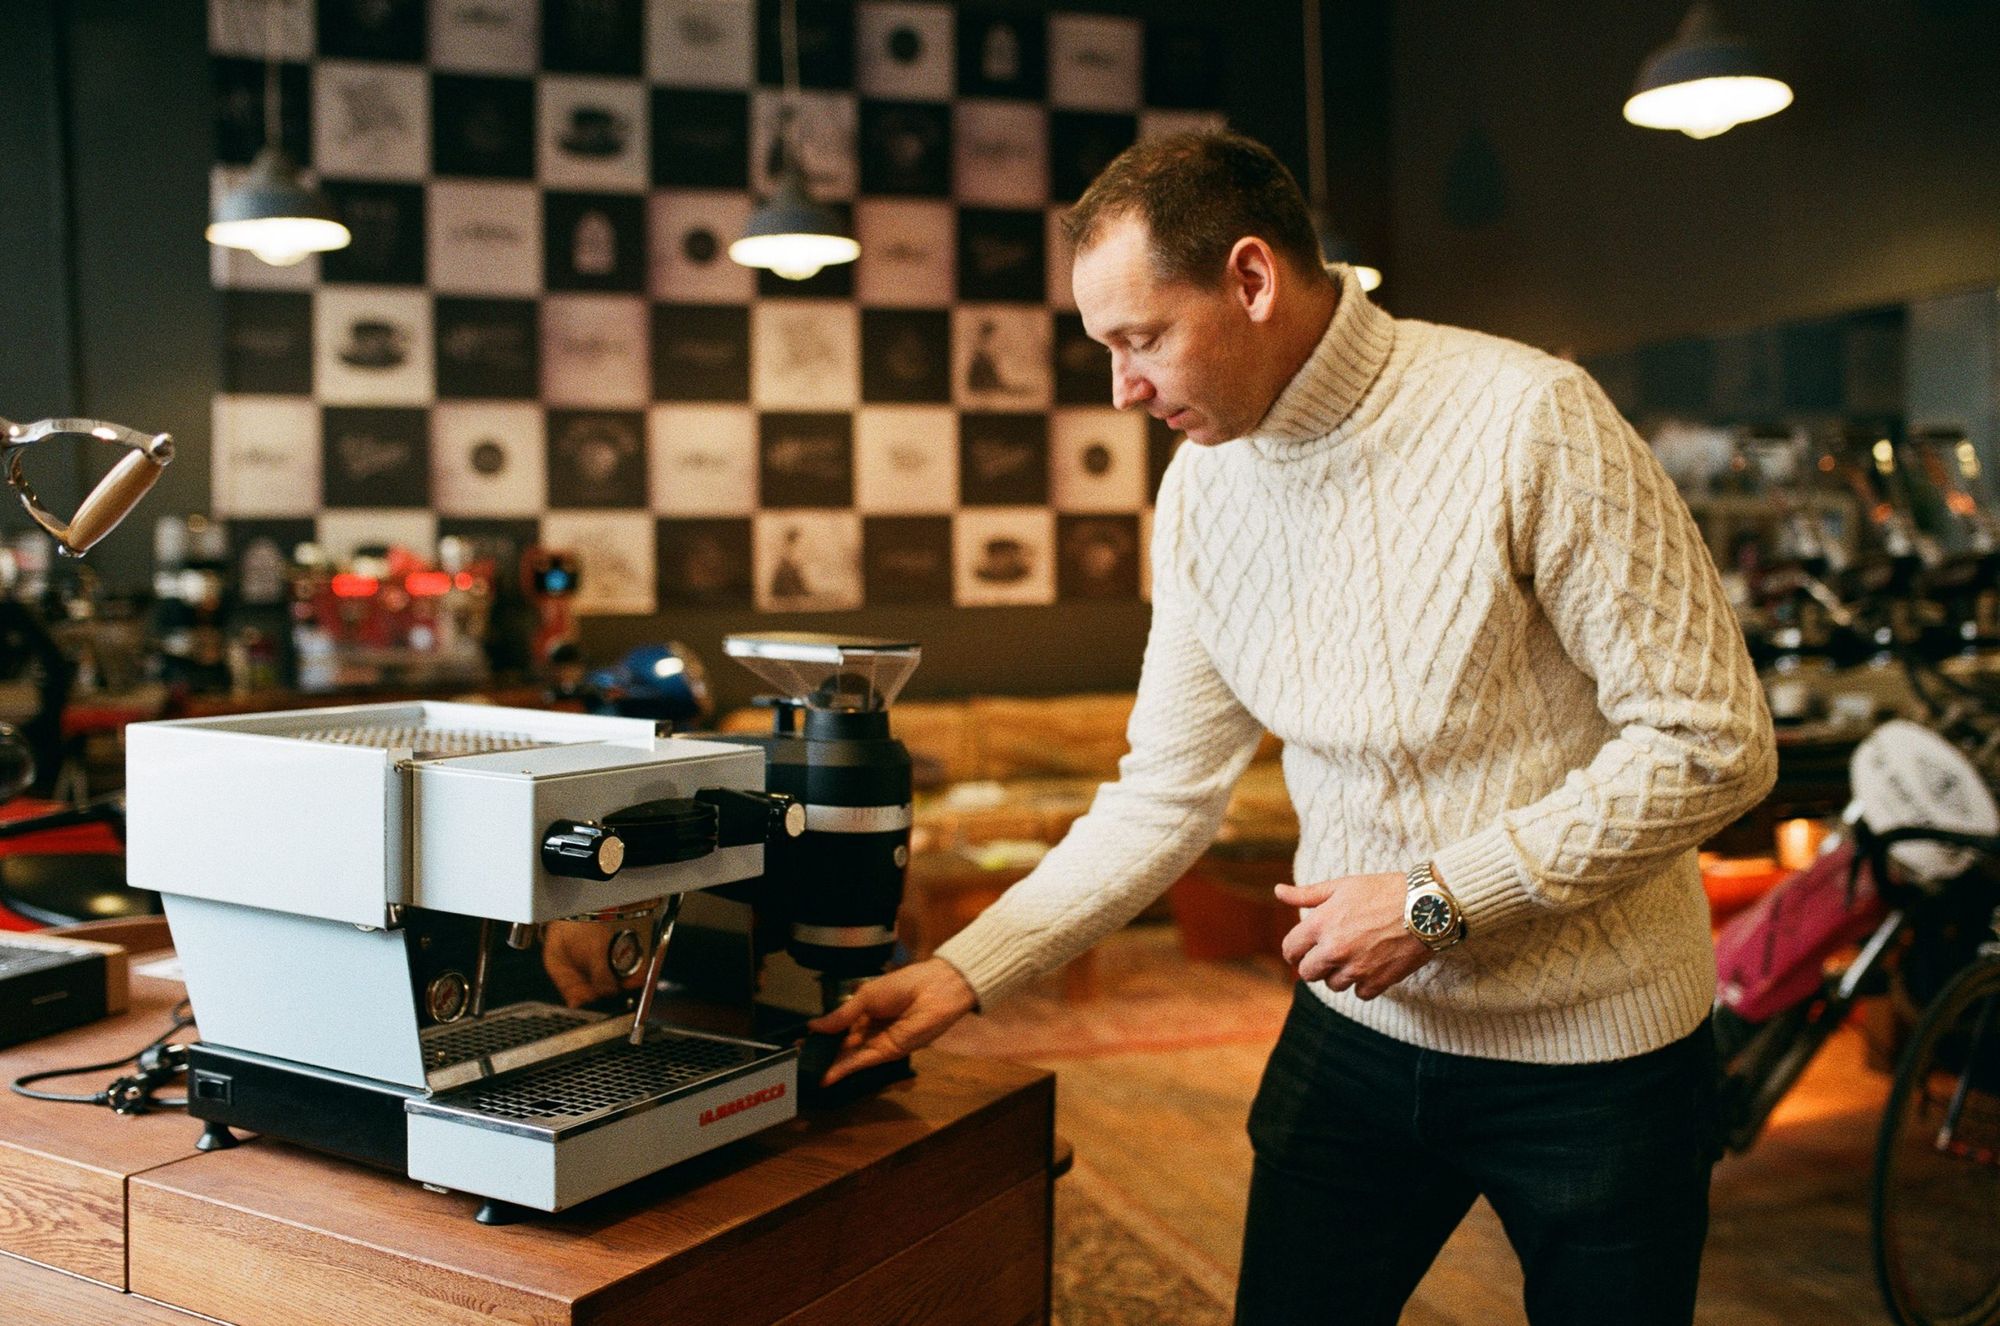 Enter the coffee machine heaven! | The eventful story of Gergely Nezvál and the La Marzocco